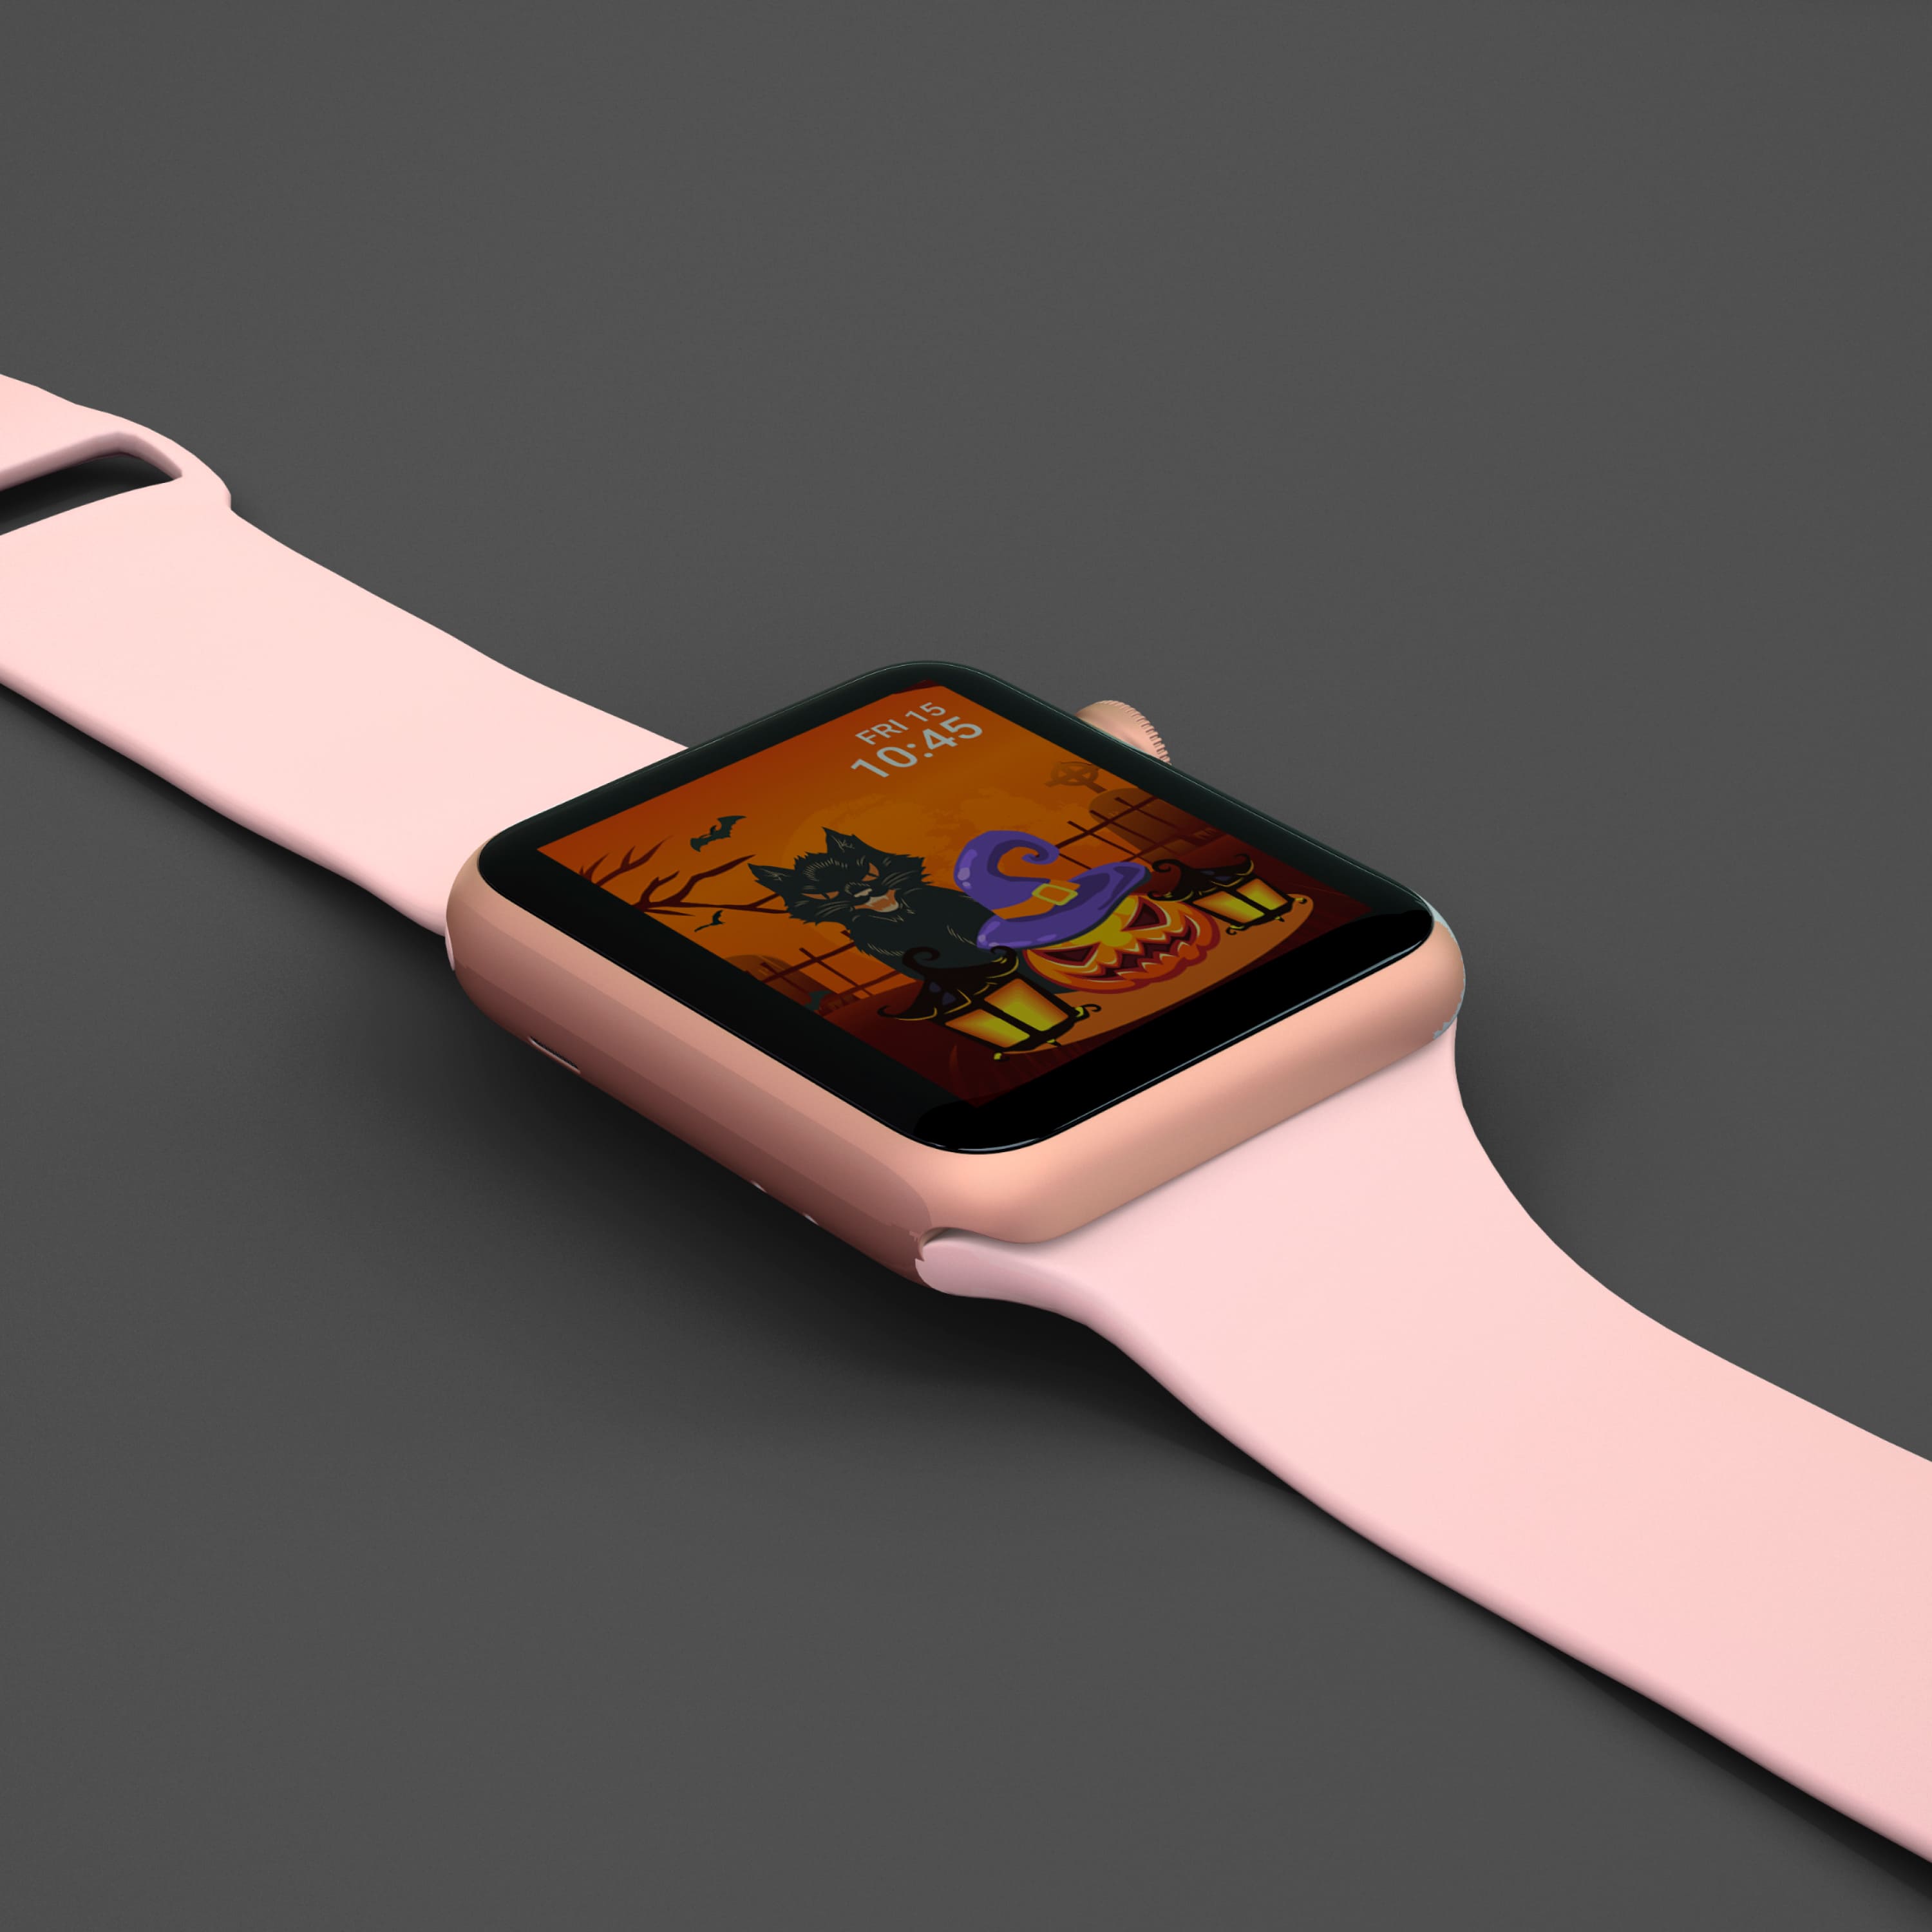 Pink apple watch with halloween illustrations.